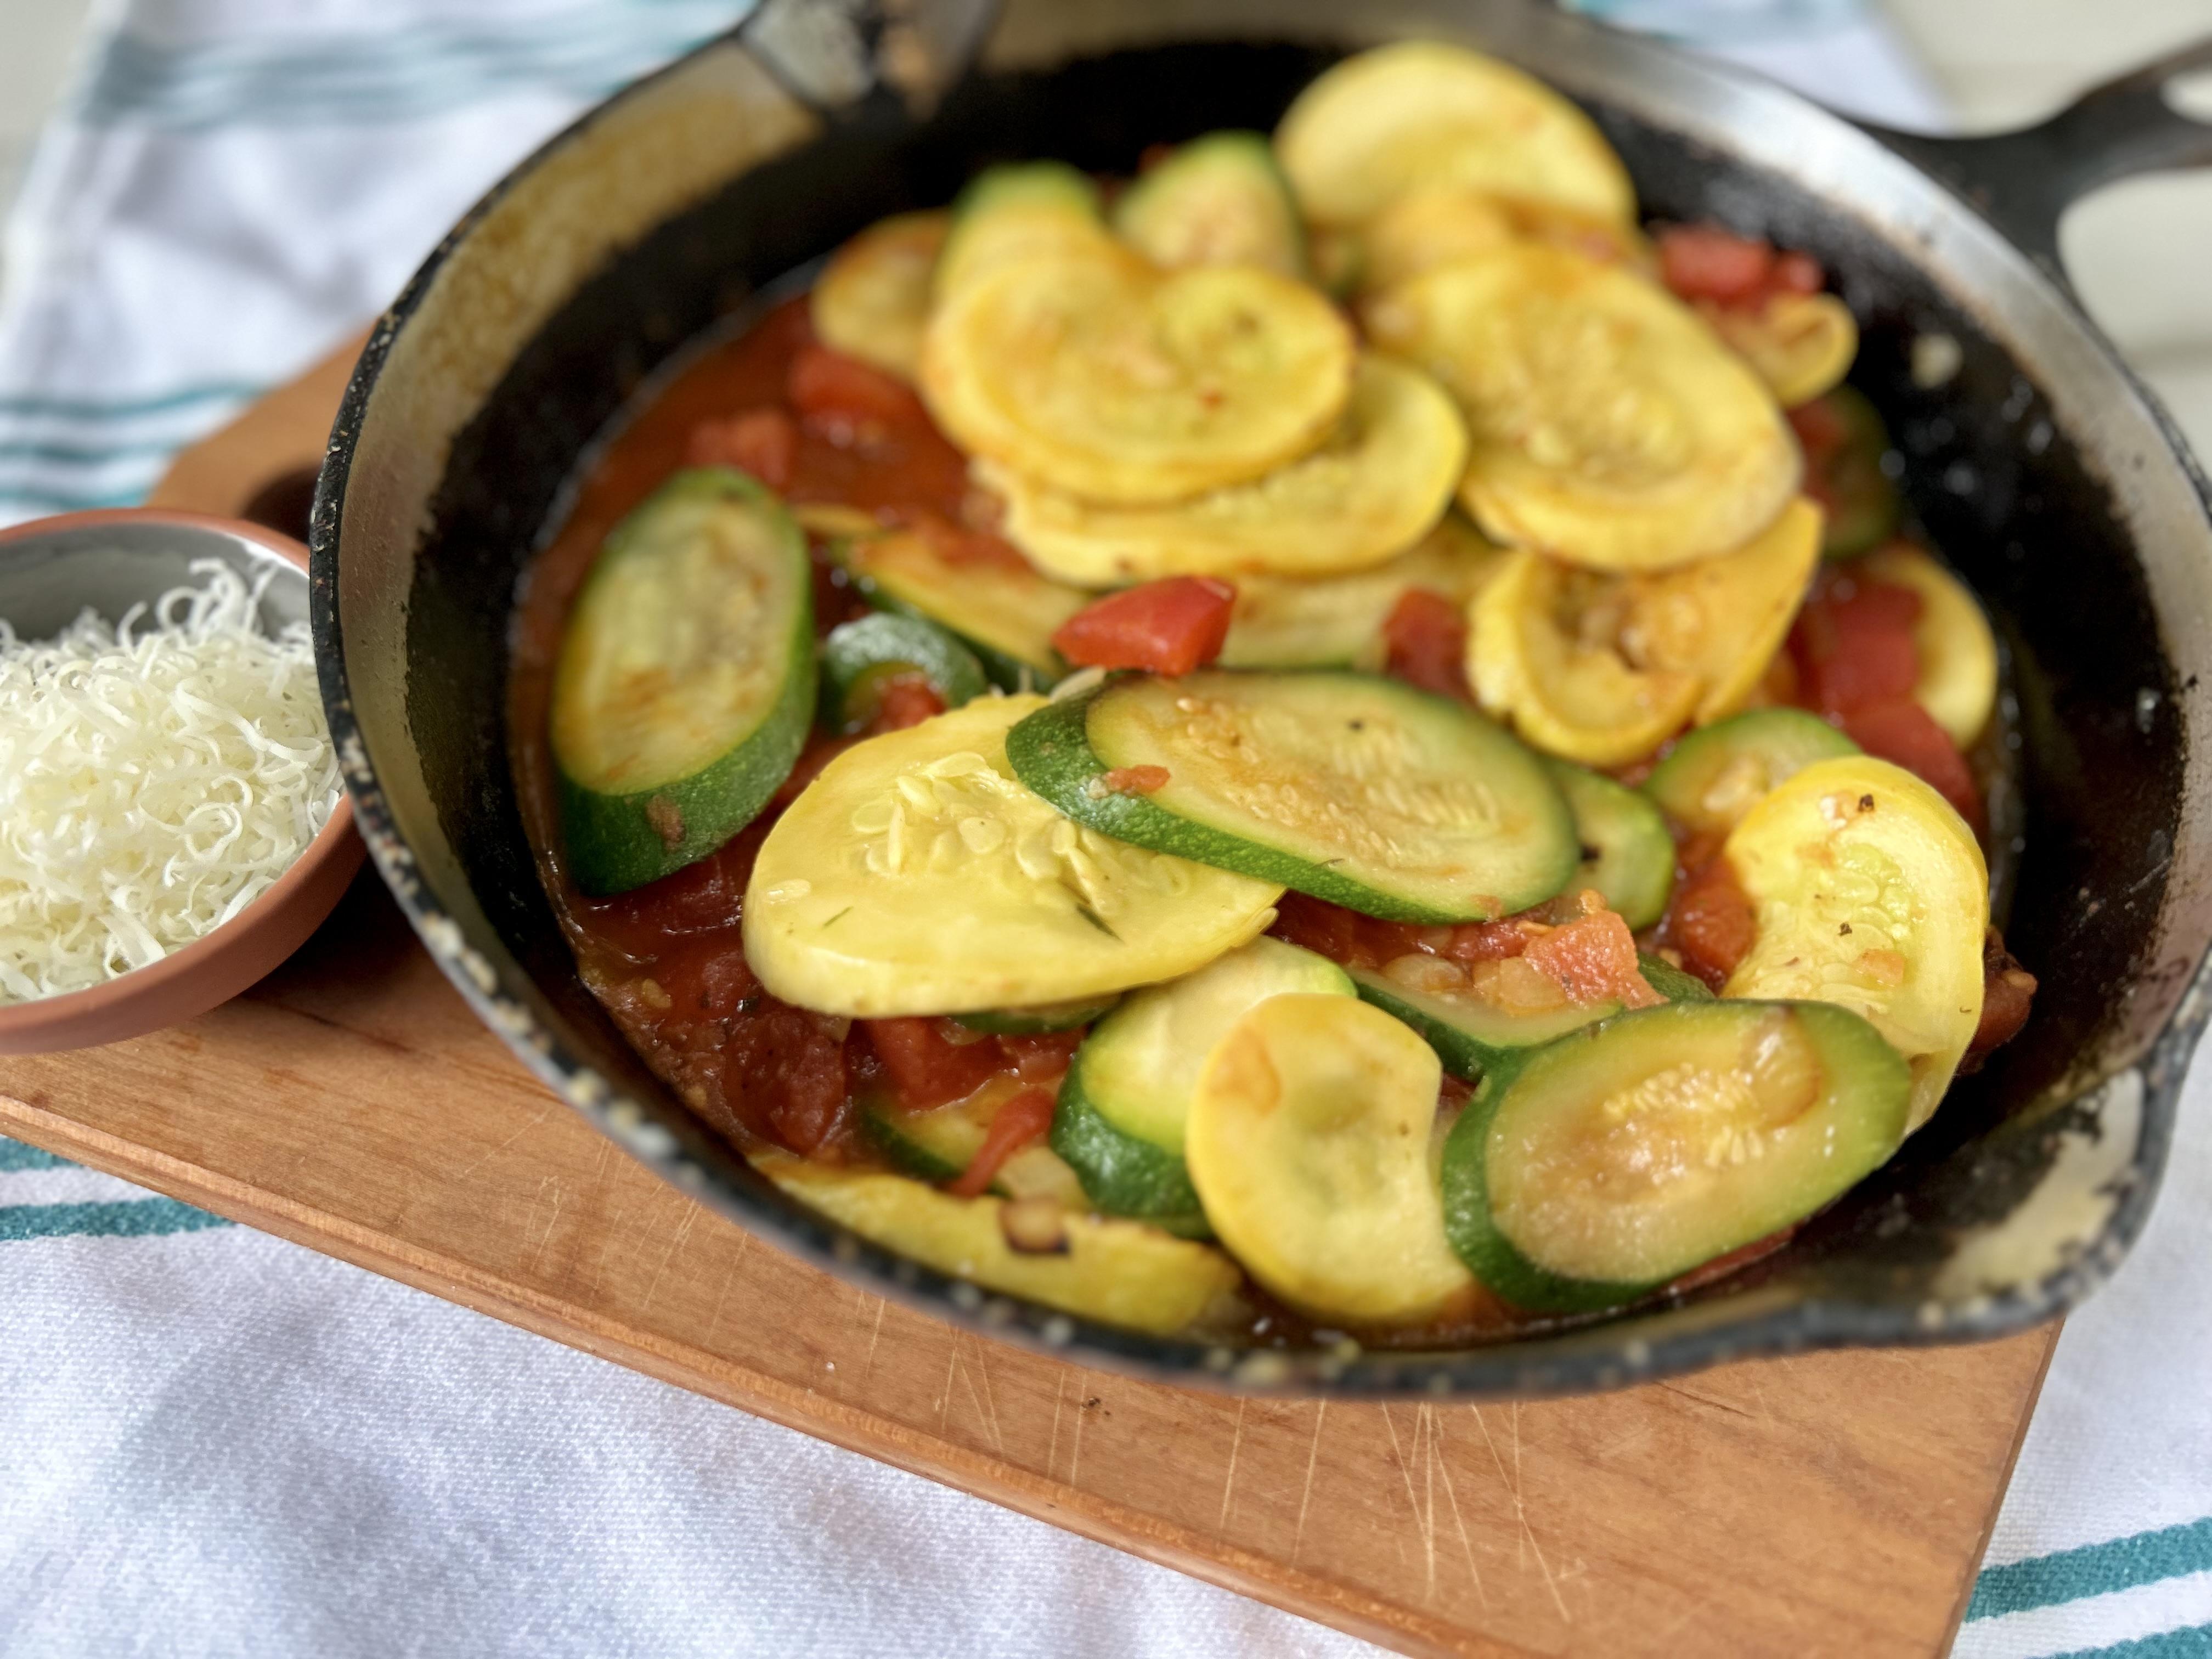 Sliced squash, zucchini, tomatoes, and onion in an iron skillet.  